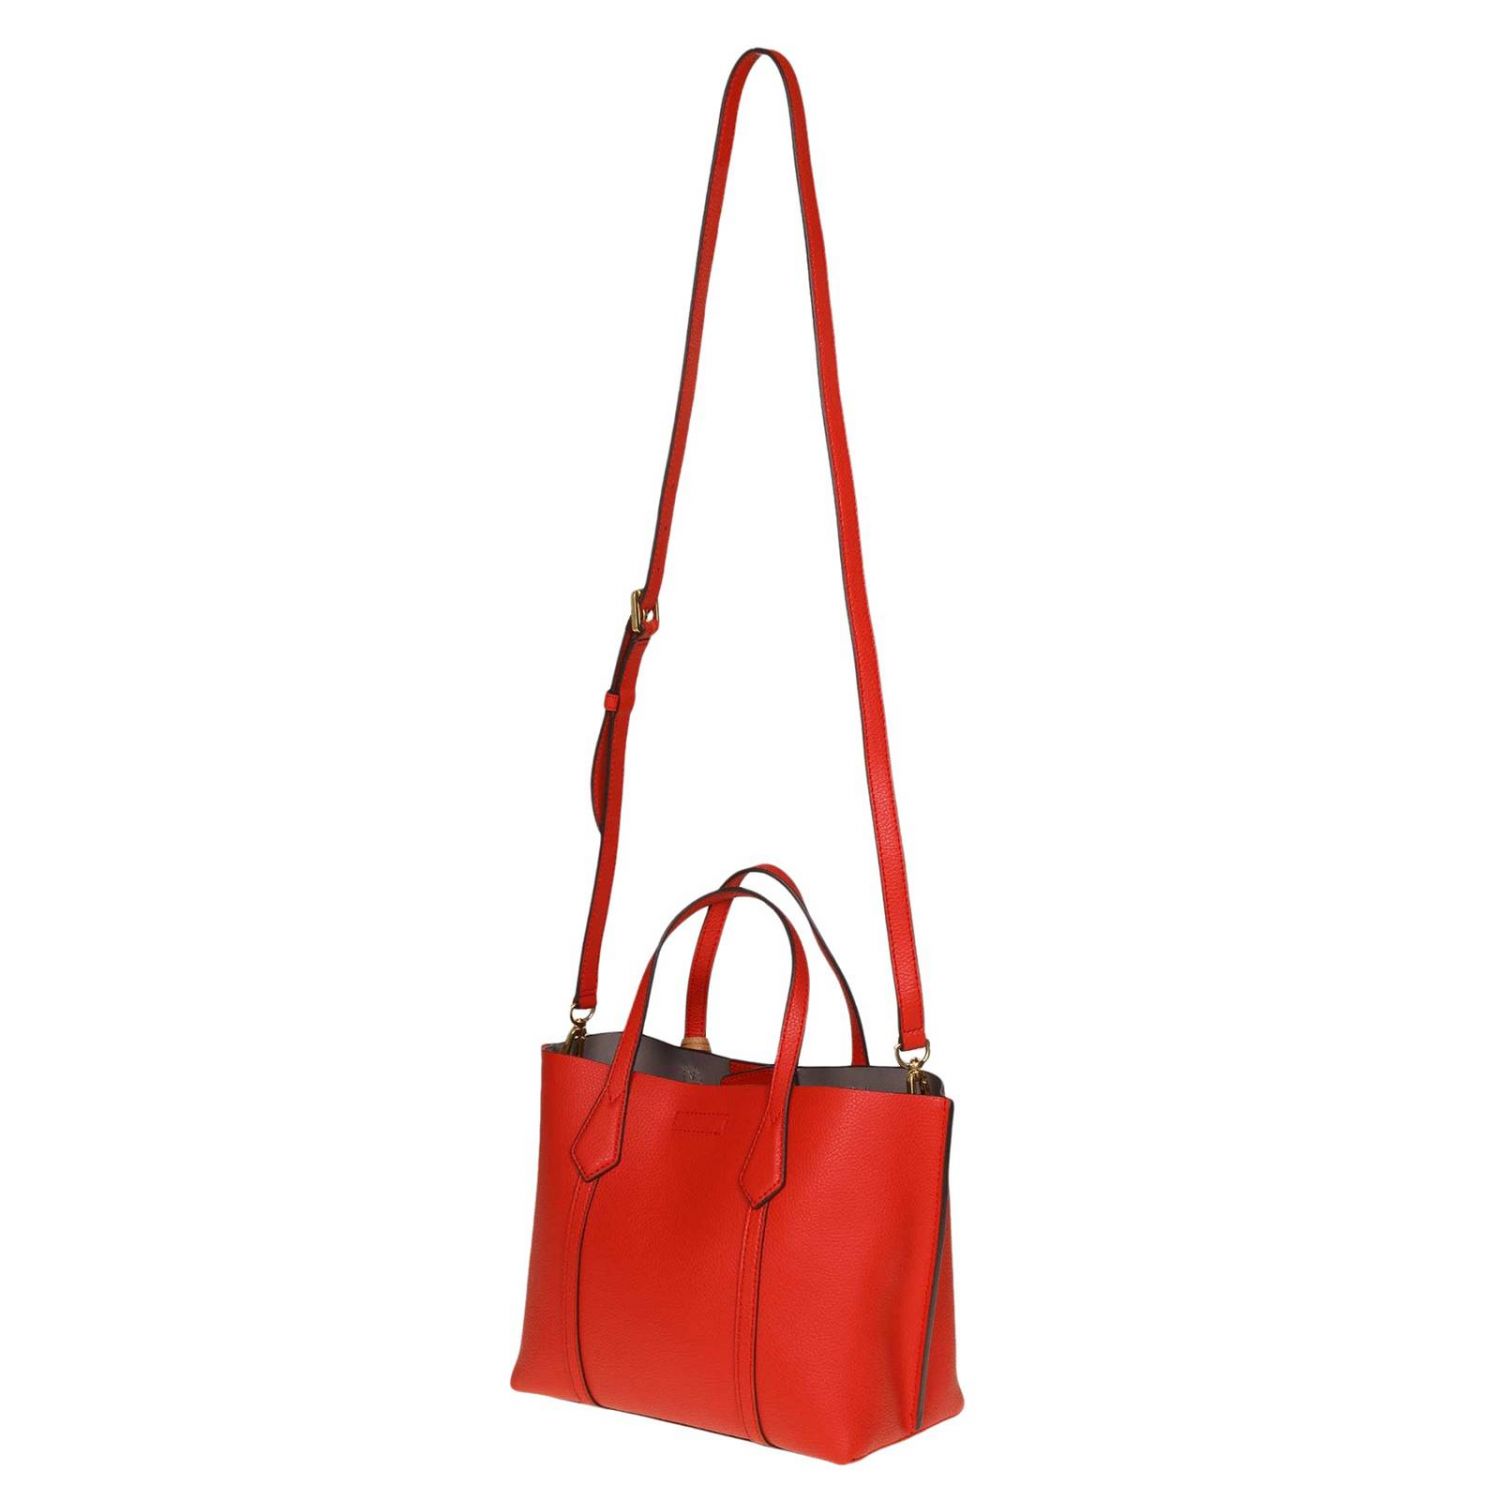 TORY BURCH: tote bags for women - Red | Tory Burch tote bags 56249 ...